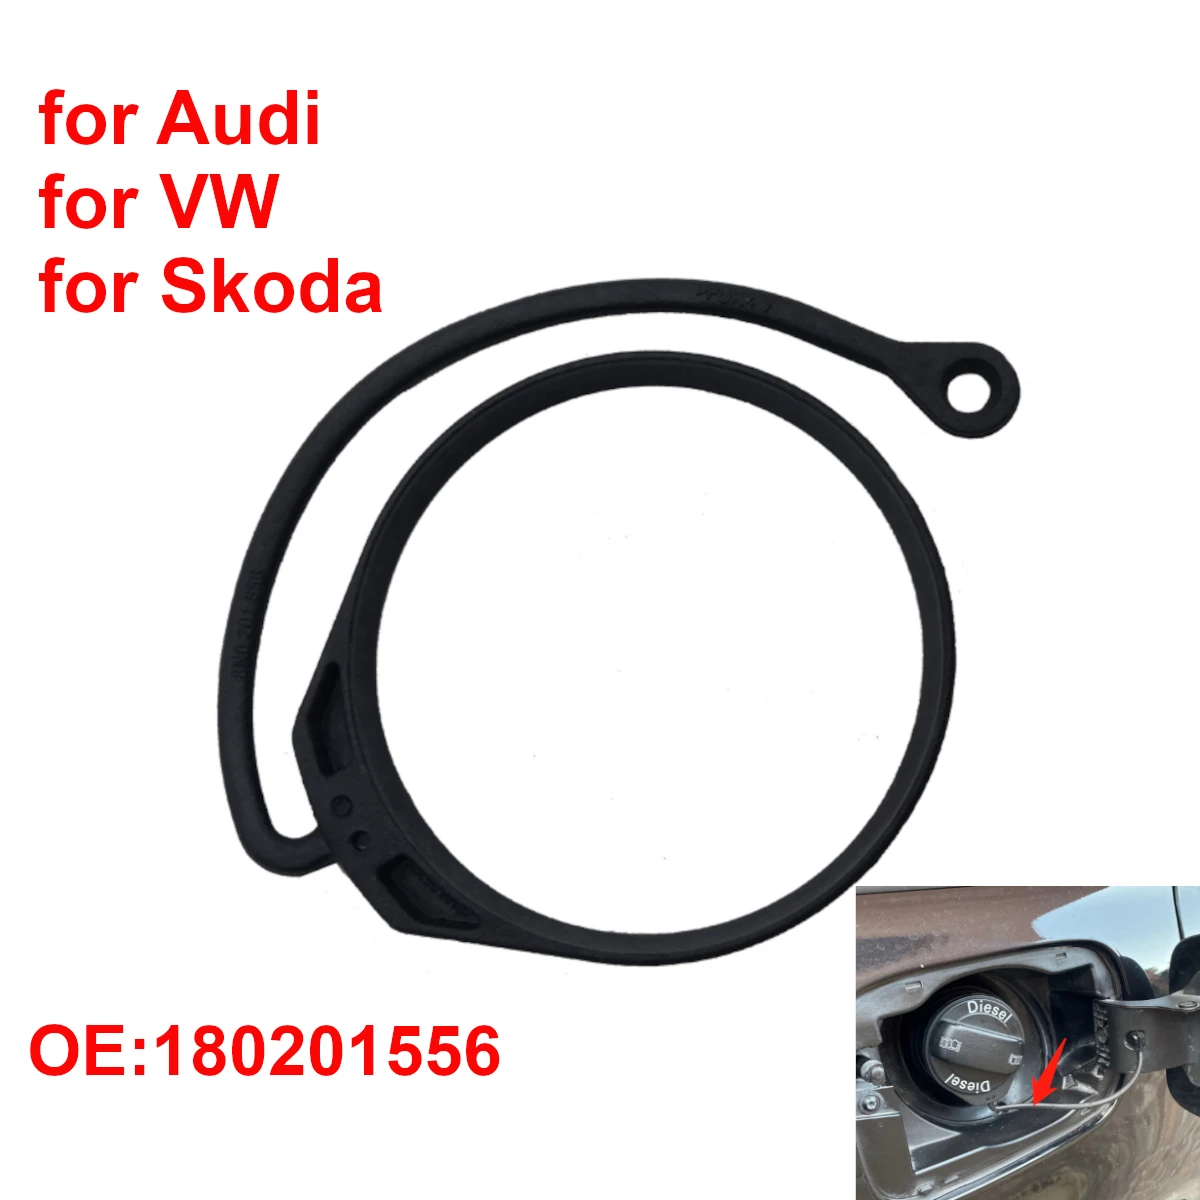 Fuel Tank Cap Band Cord for Audi A1 A3 A4 A5 A6 A7 A8 Q3 Q5 Q7 for